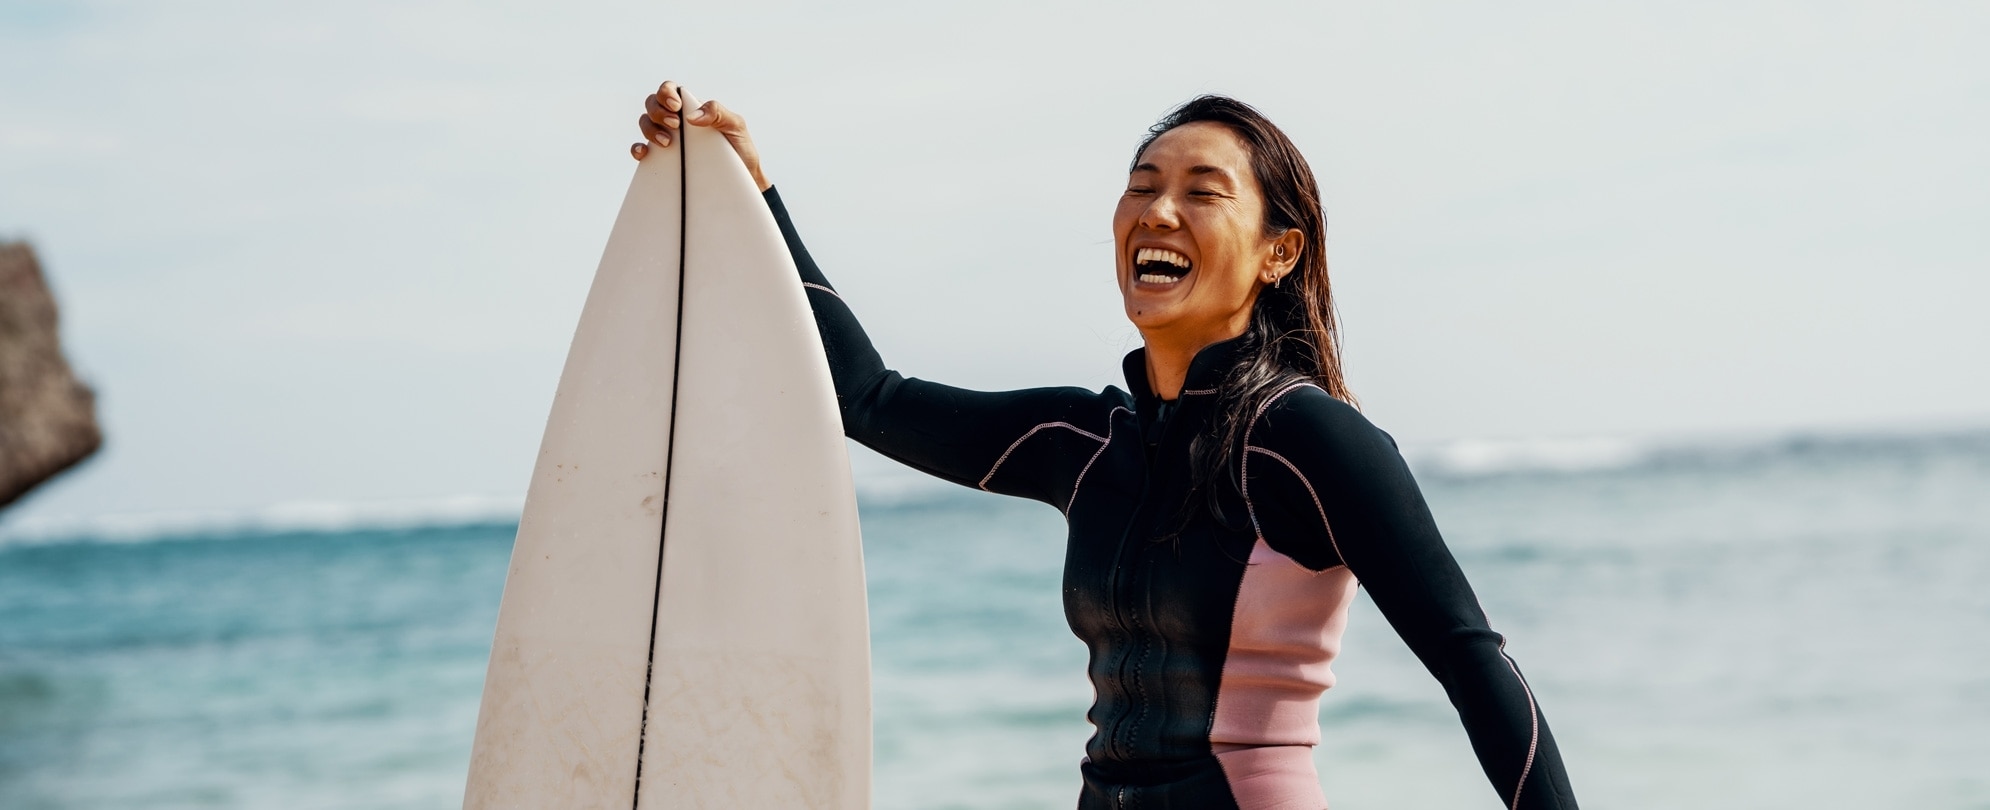 Excited woman in a wetsuit holding surfboard on the beach